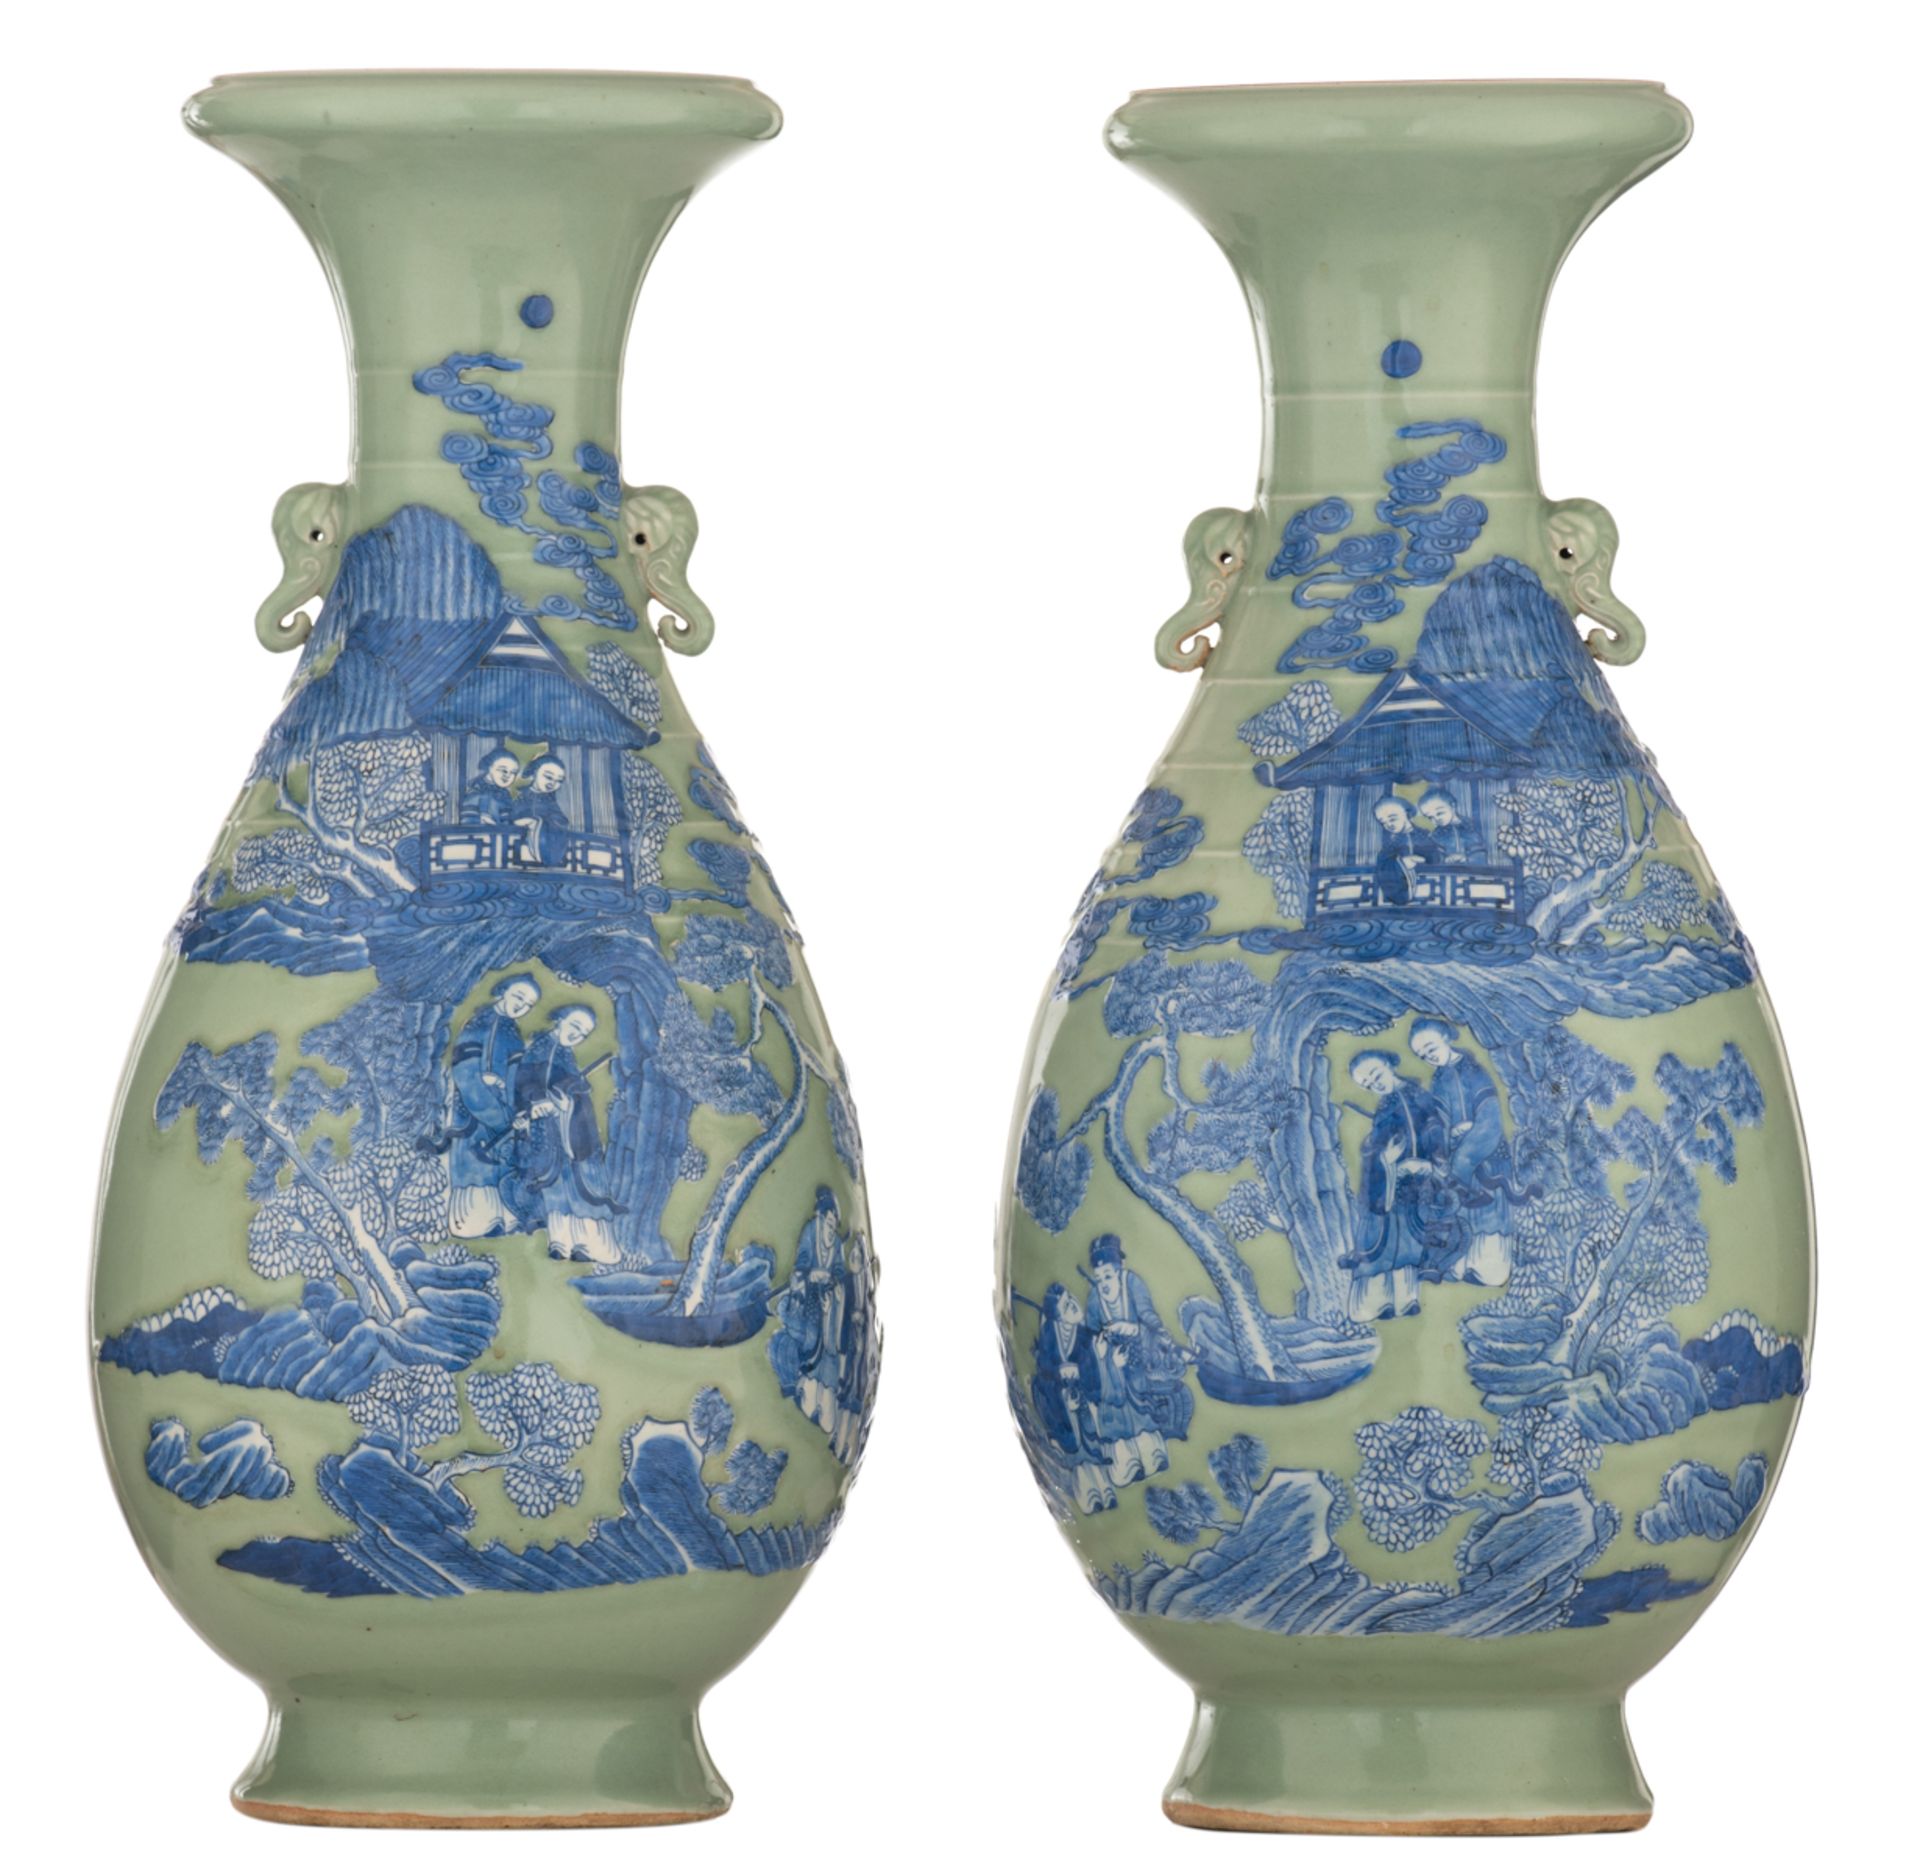 A pair of celadon ground begonia shaped vases, blue and white decorated with a scene from 'The